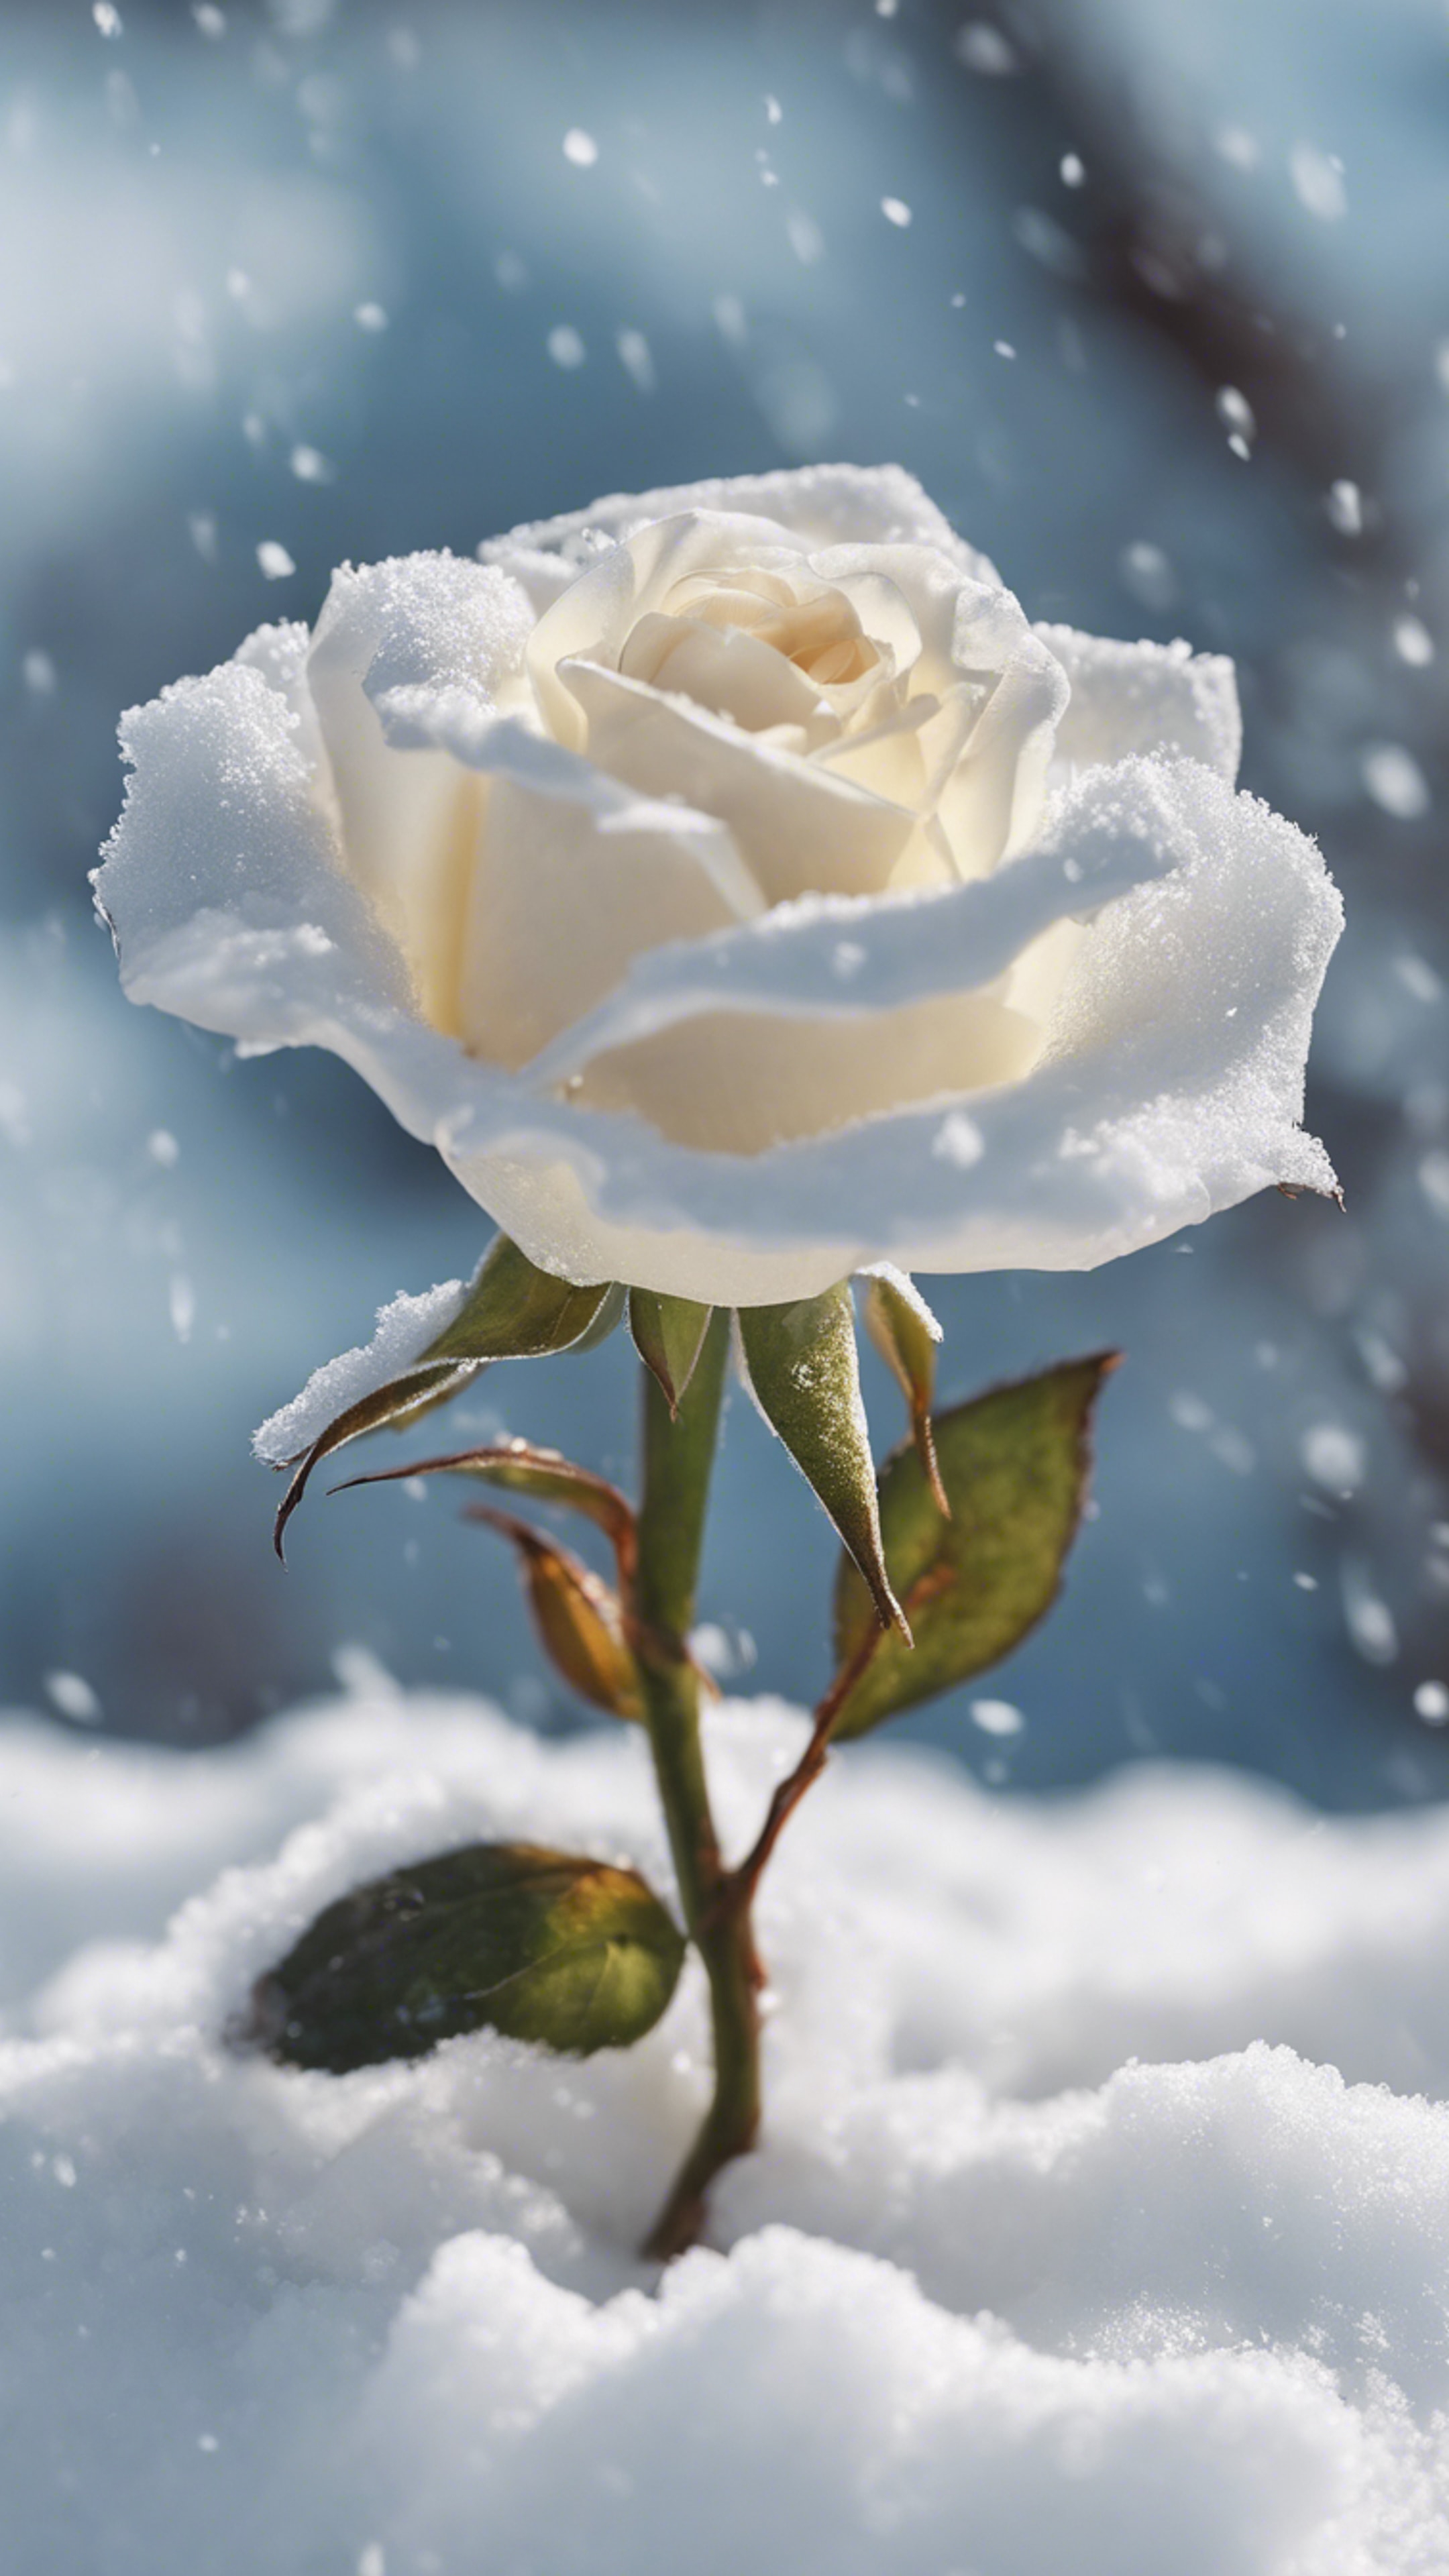 A newly opened white rose sticking out of a snowdrift in early spring.壁紙[6918b7c4f5774047824c]